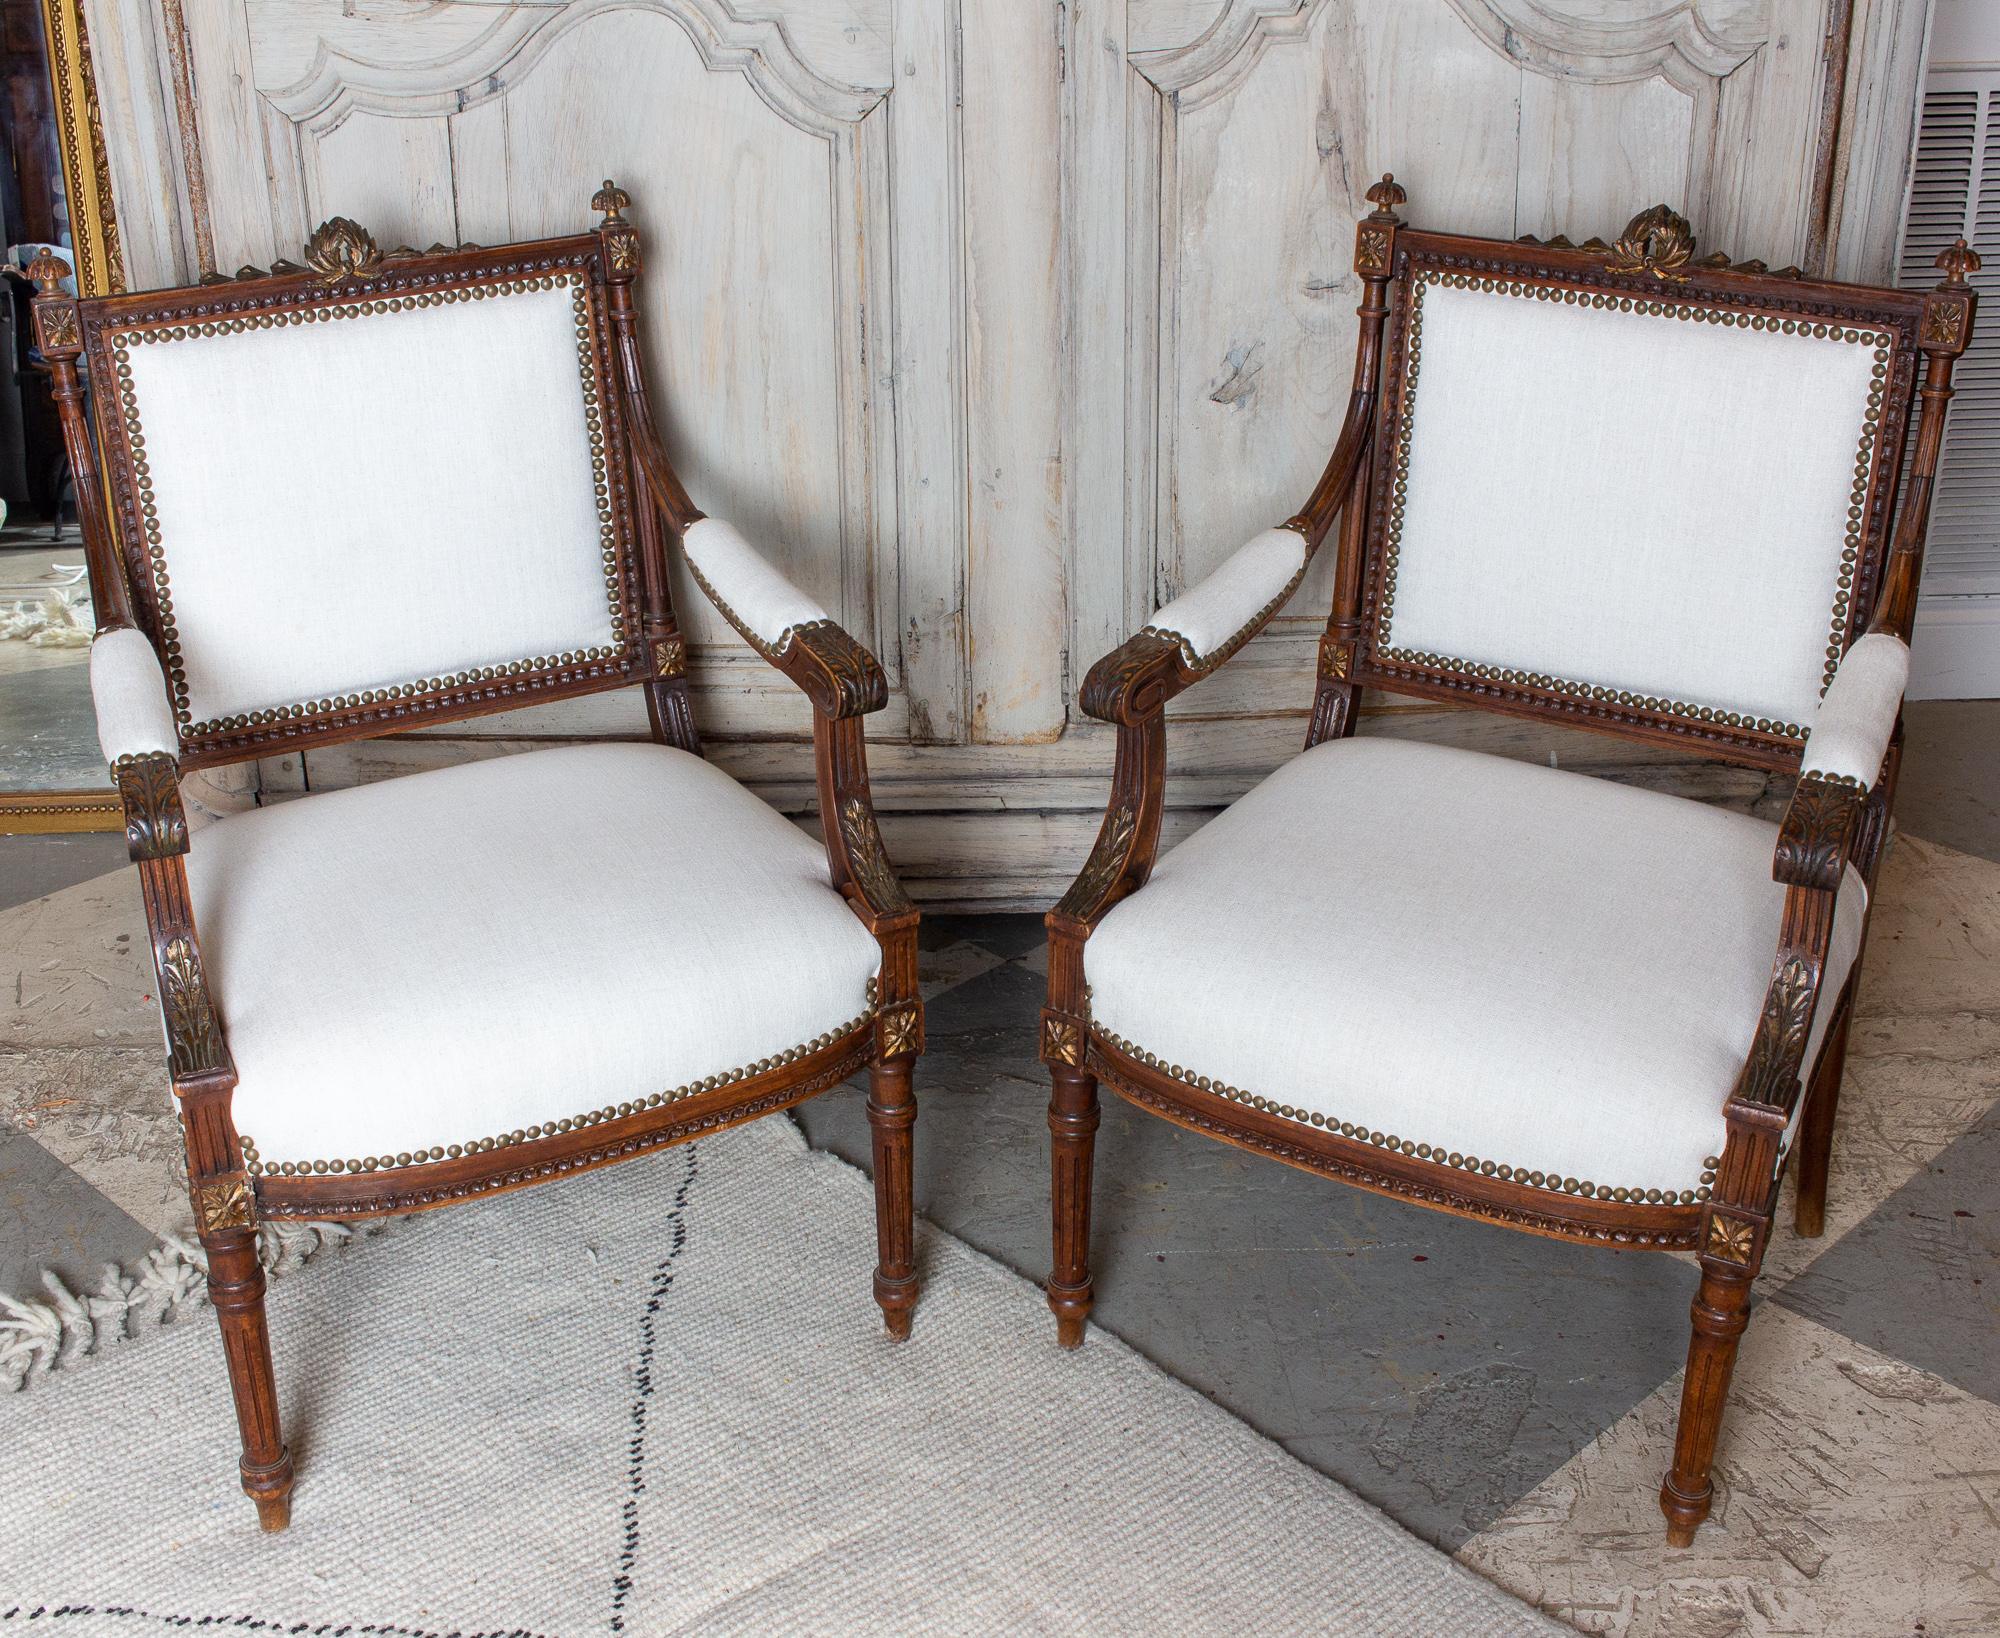 Antique French Hand-Carved Louis XVI Armchairs with Gilt Details in Linen 15